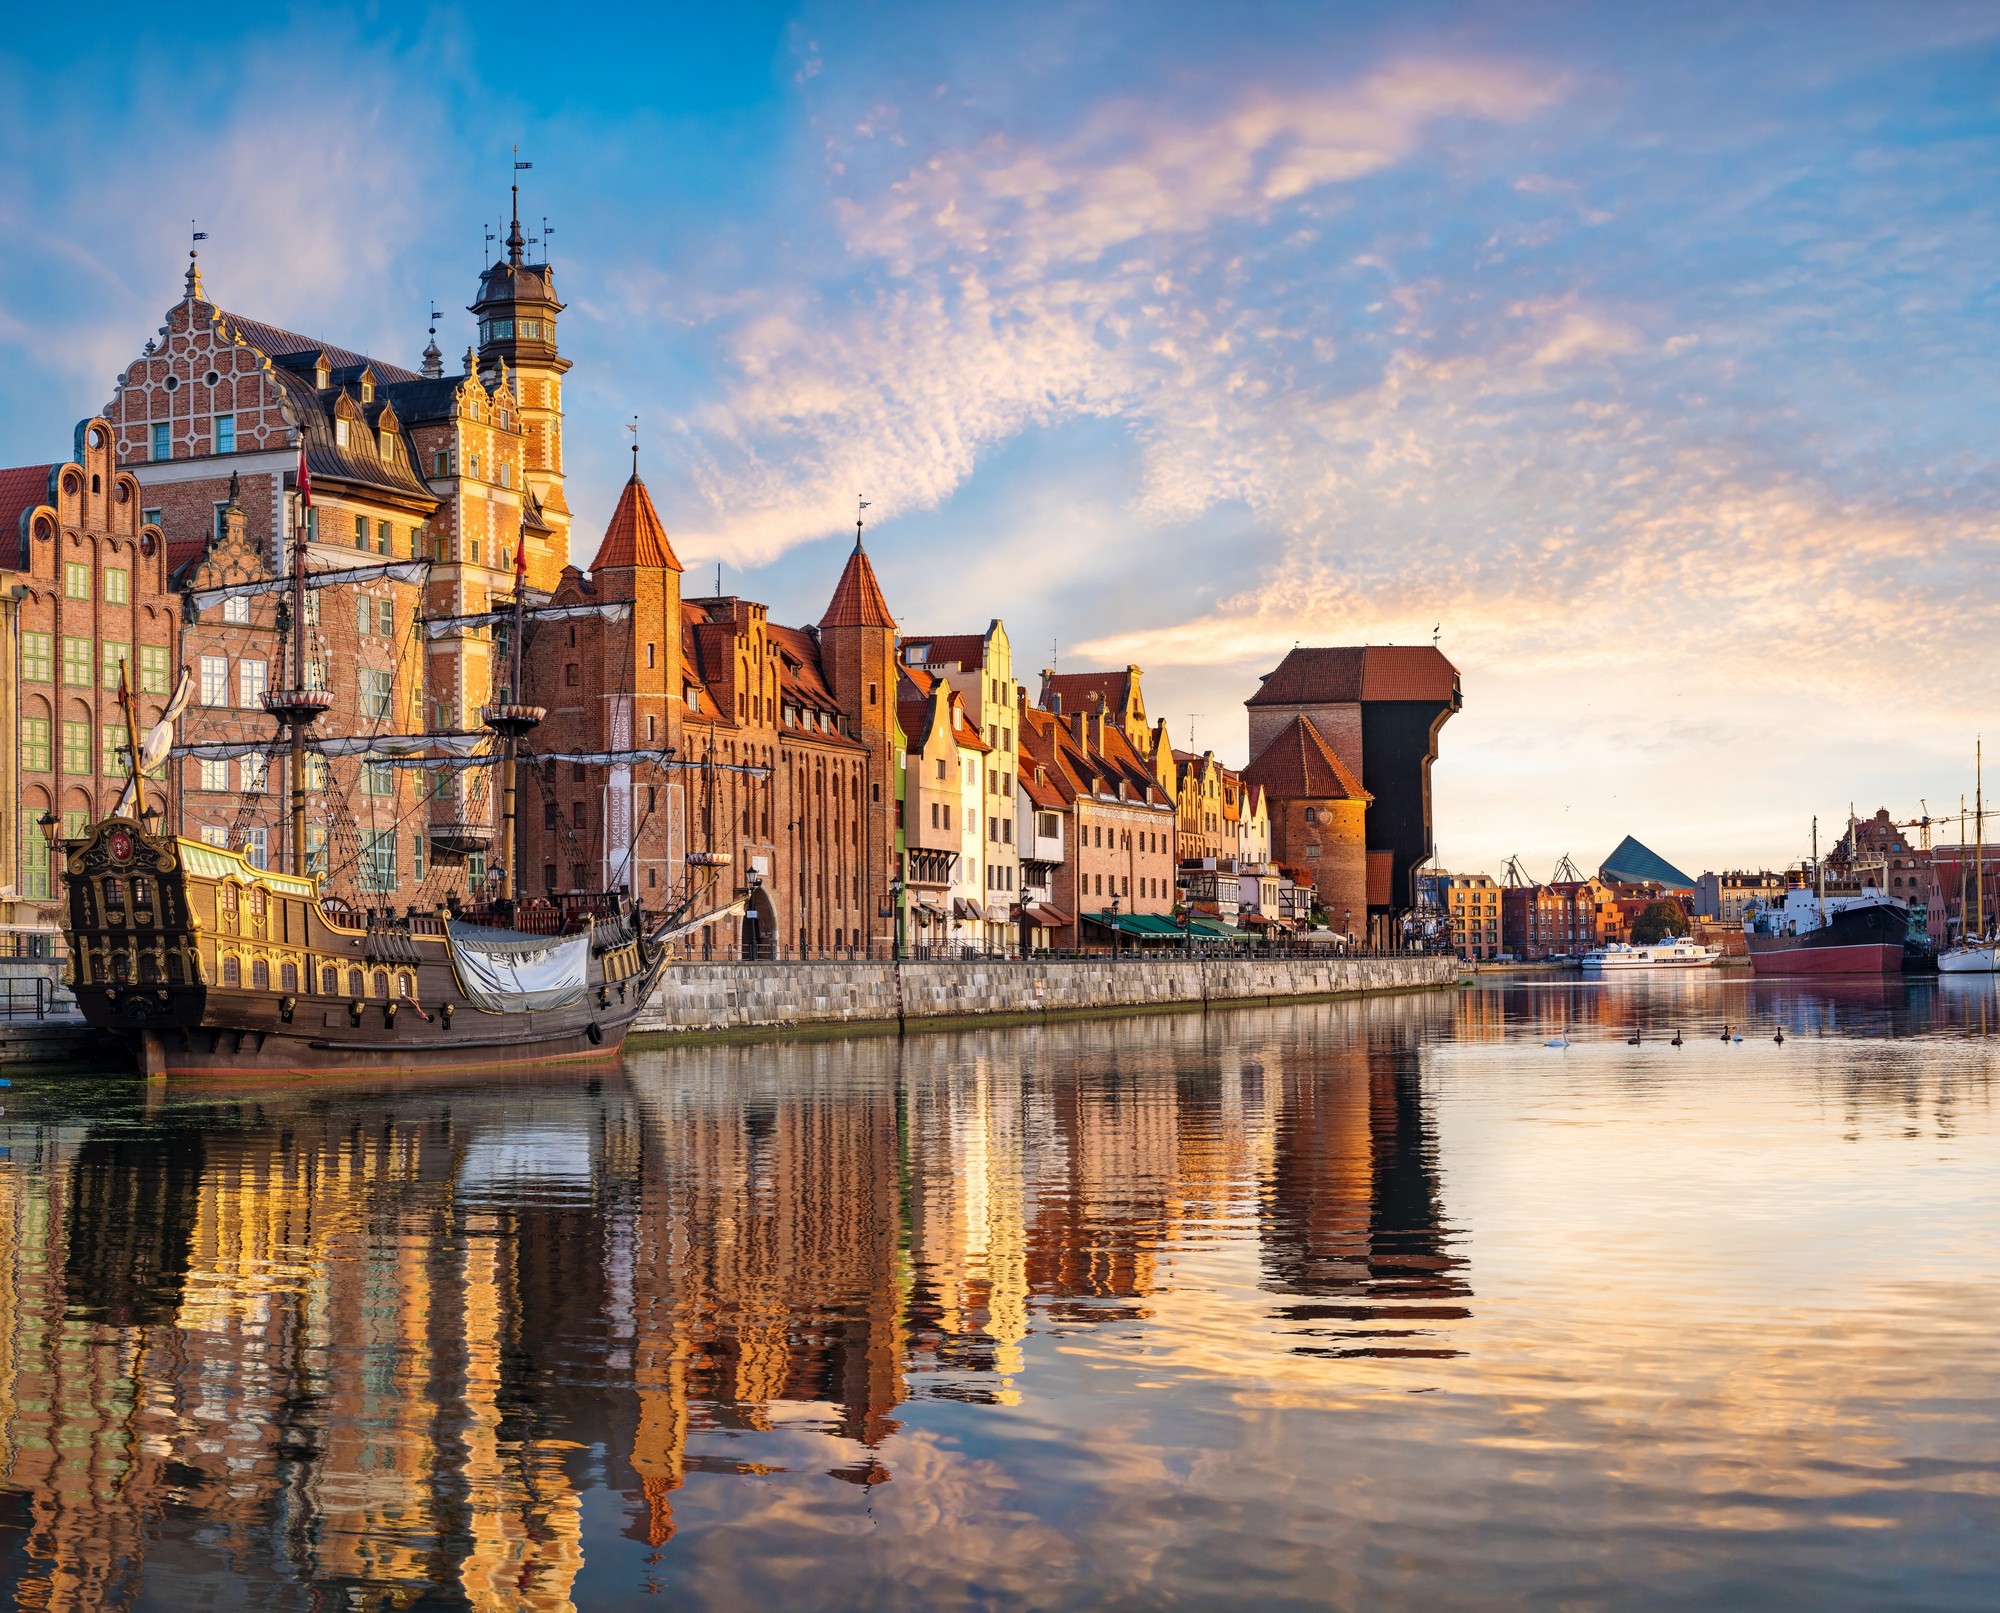 Gdansk guide by In Your Pocket. The best free city guide to Gdańsk